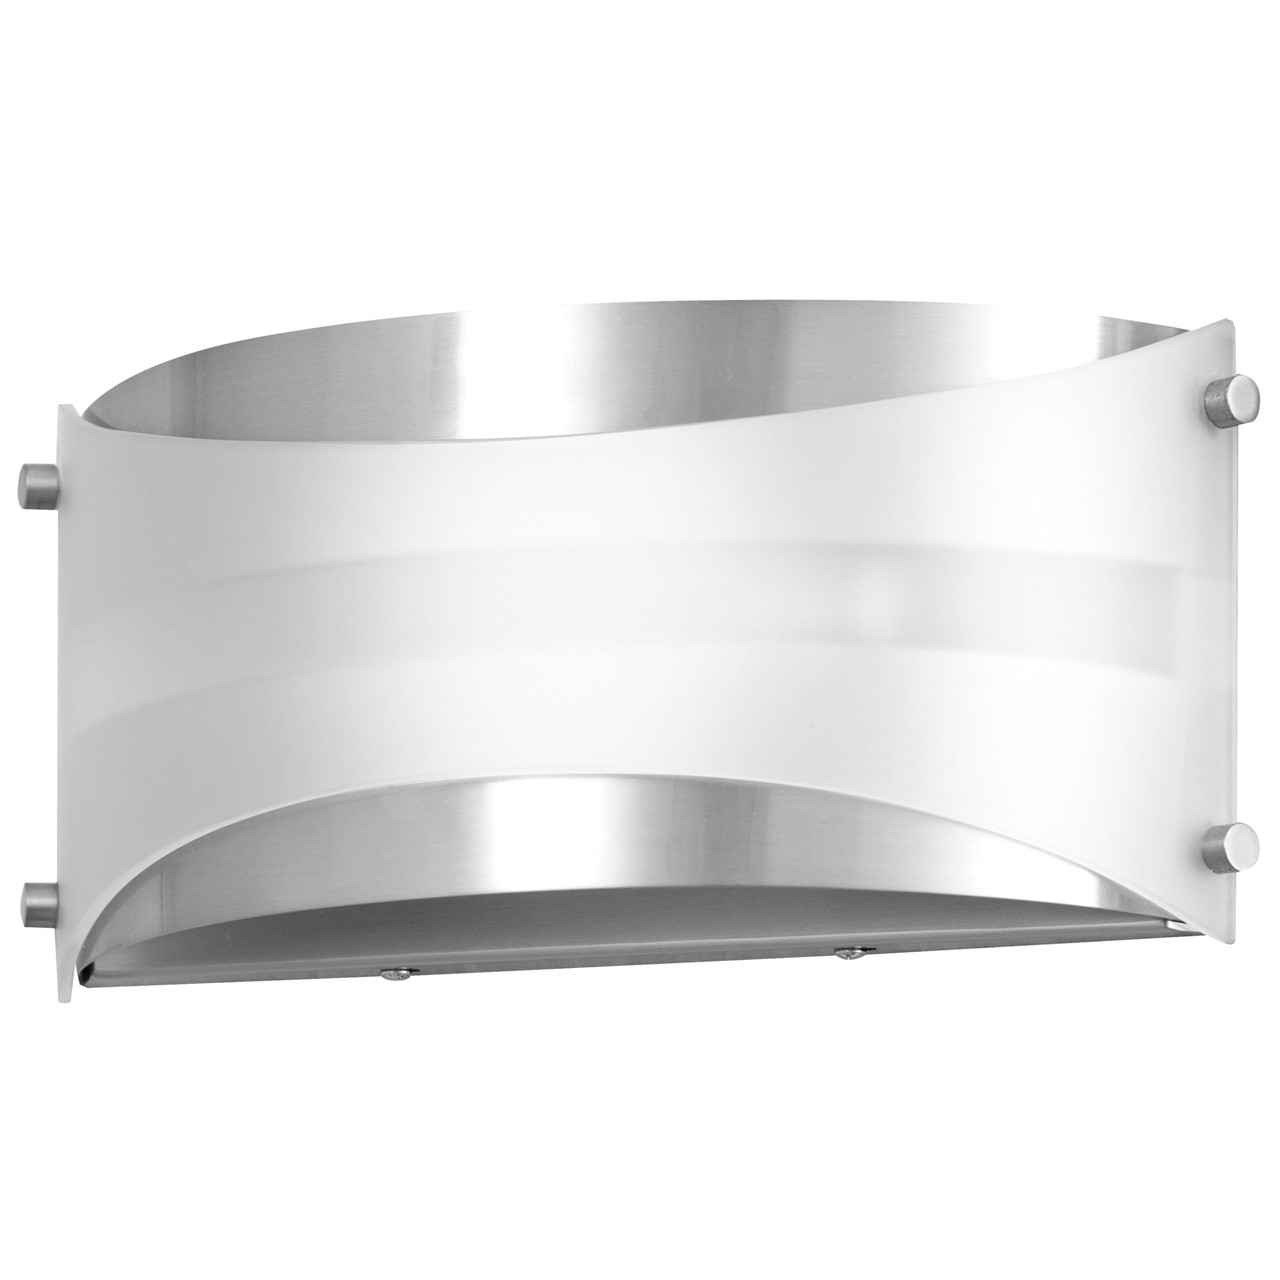 7"H Brushed Nickel Wall Sconce with Frosted Glass Shade